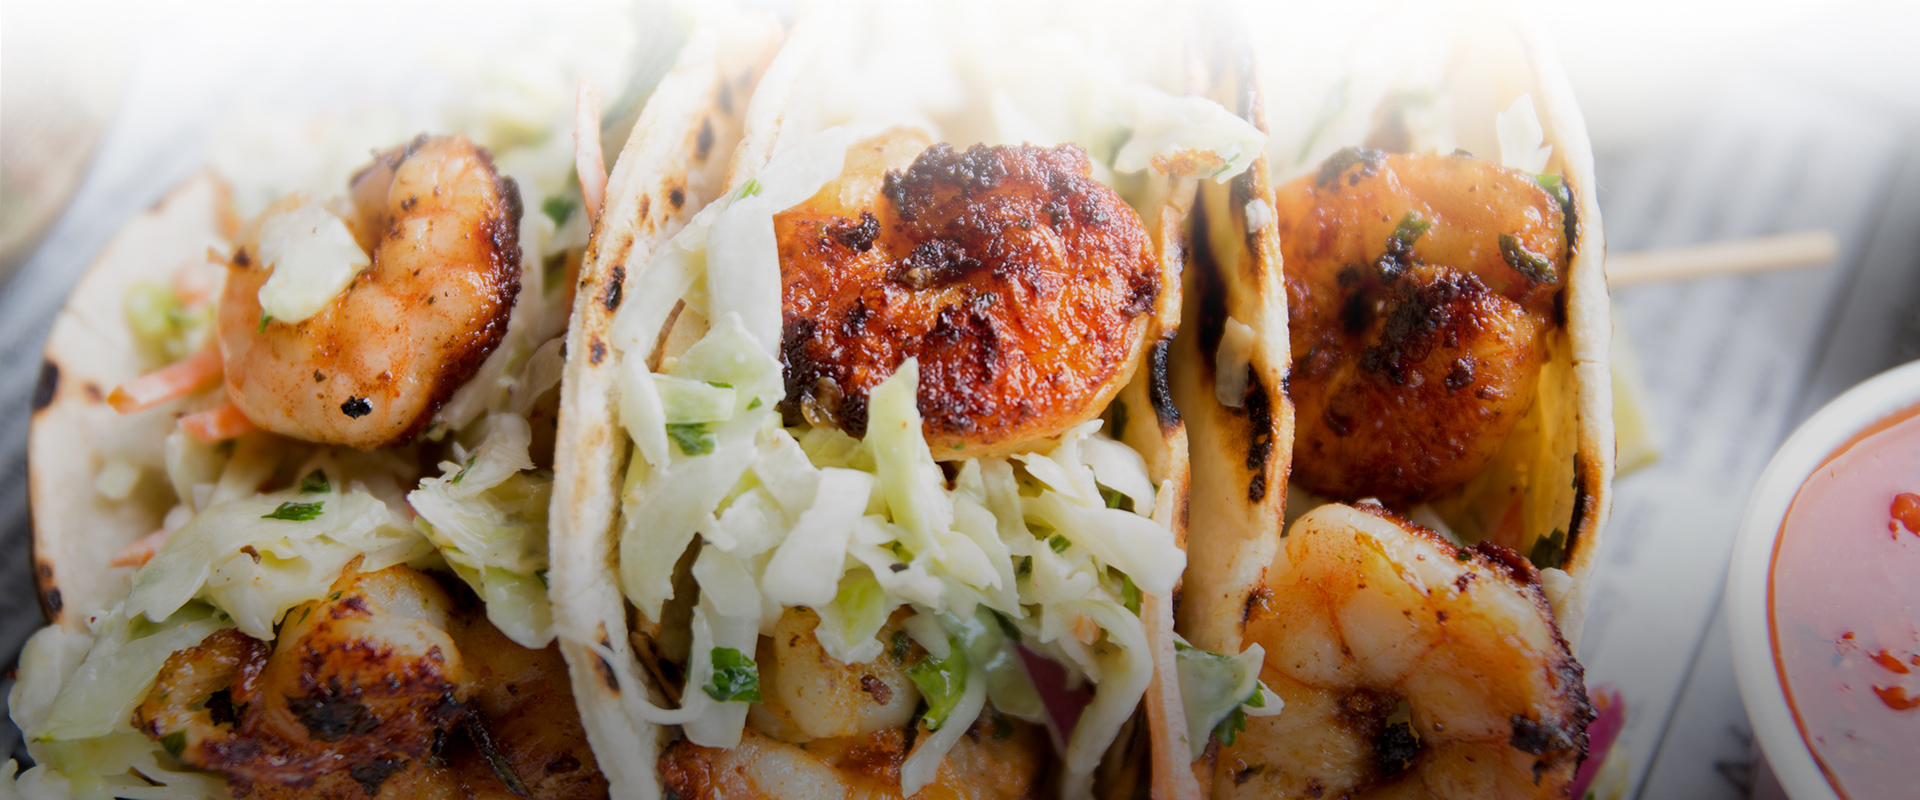 Succulent looking blackened shrimp taco with cabbage